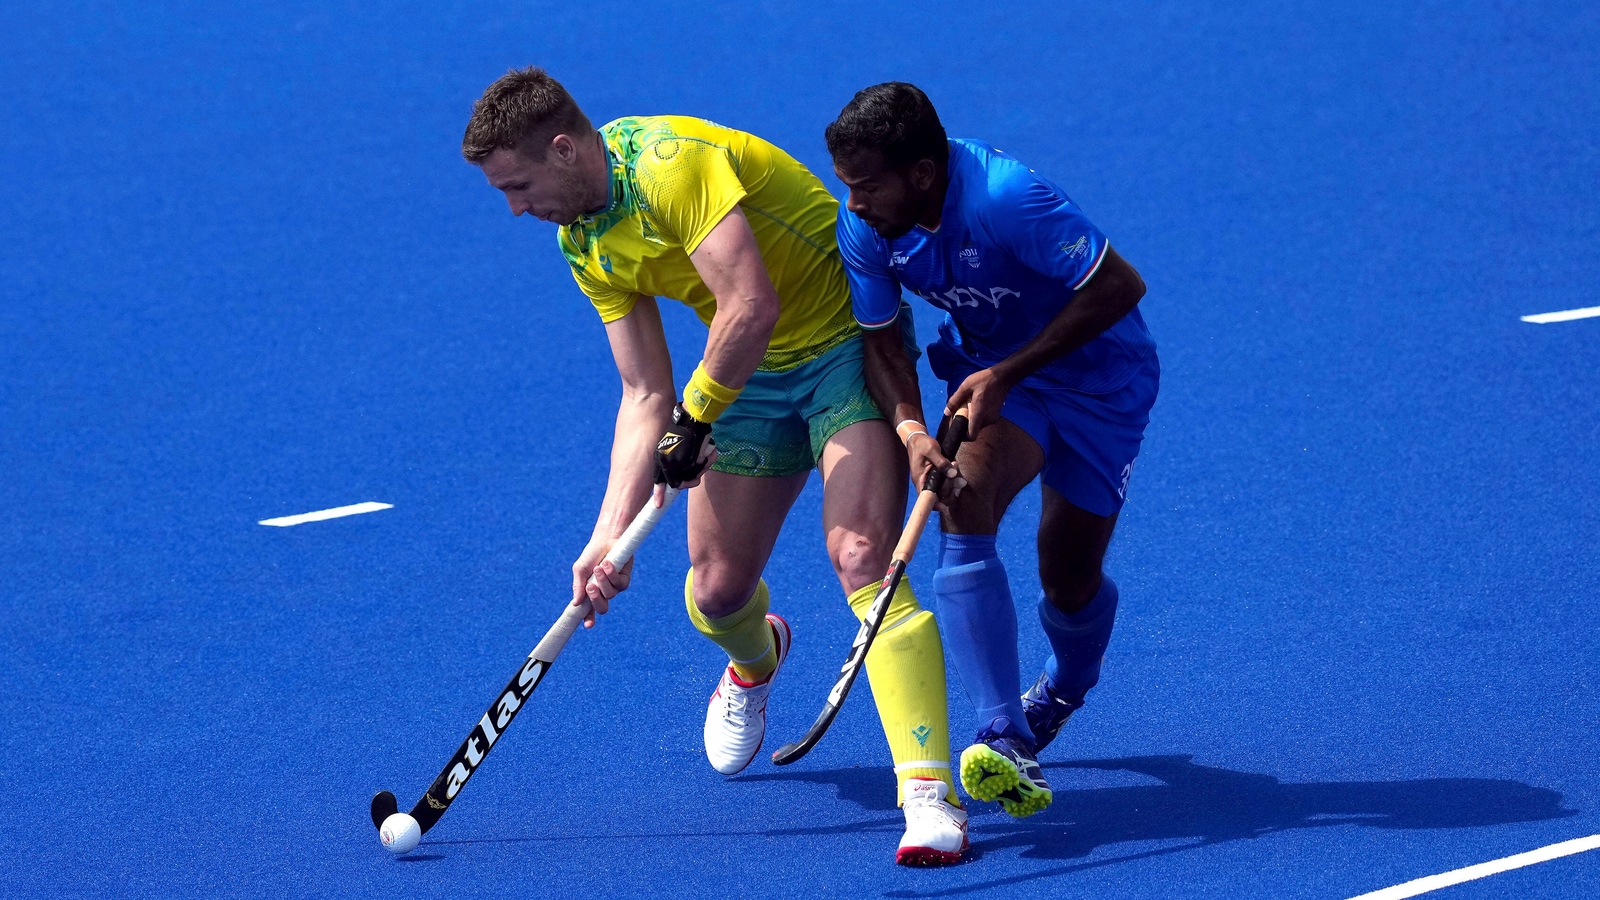 India vs Australia Hockey Highlights, Commonwealth Games 2022 Final IND grab silver medal, crash to 0-7 defeat vs AUS Hindustan Times